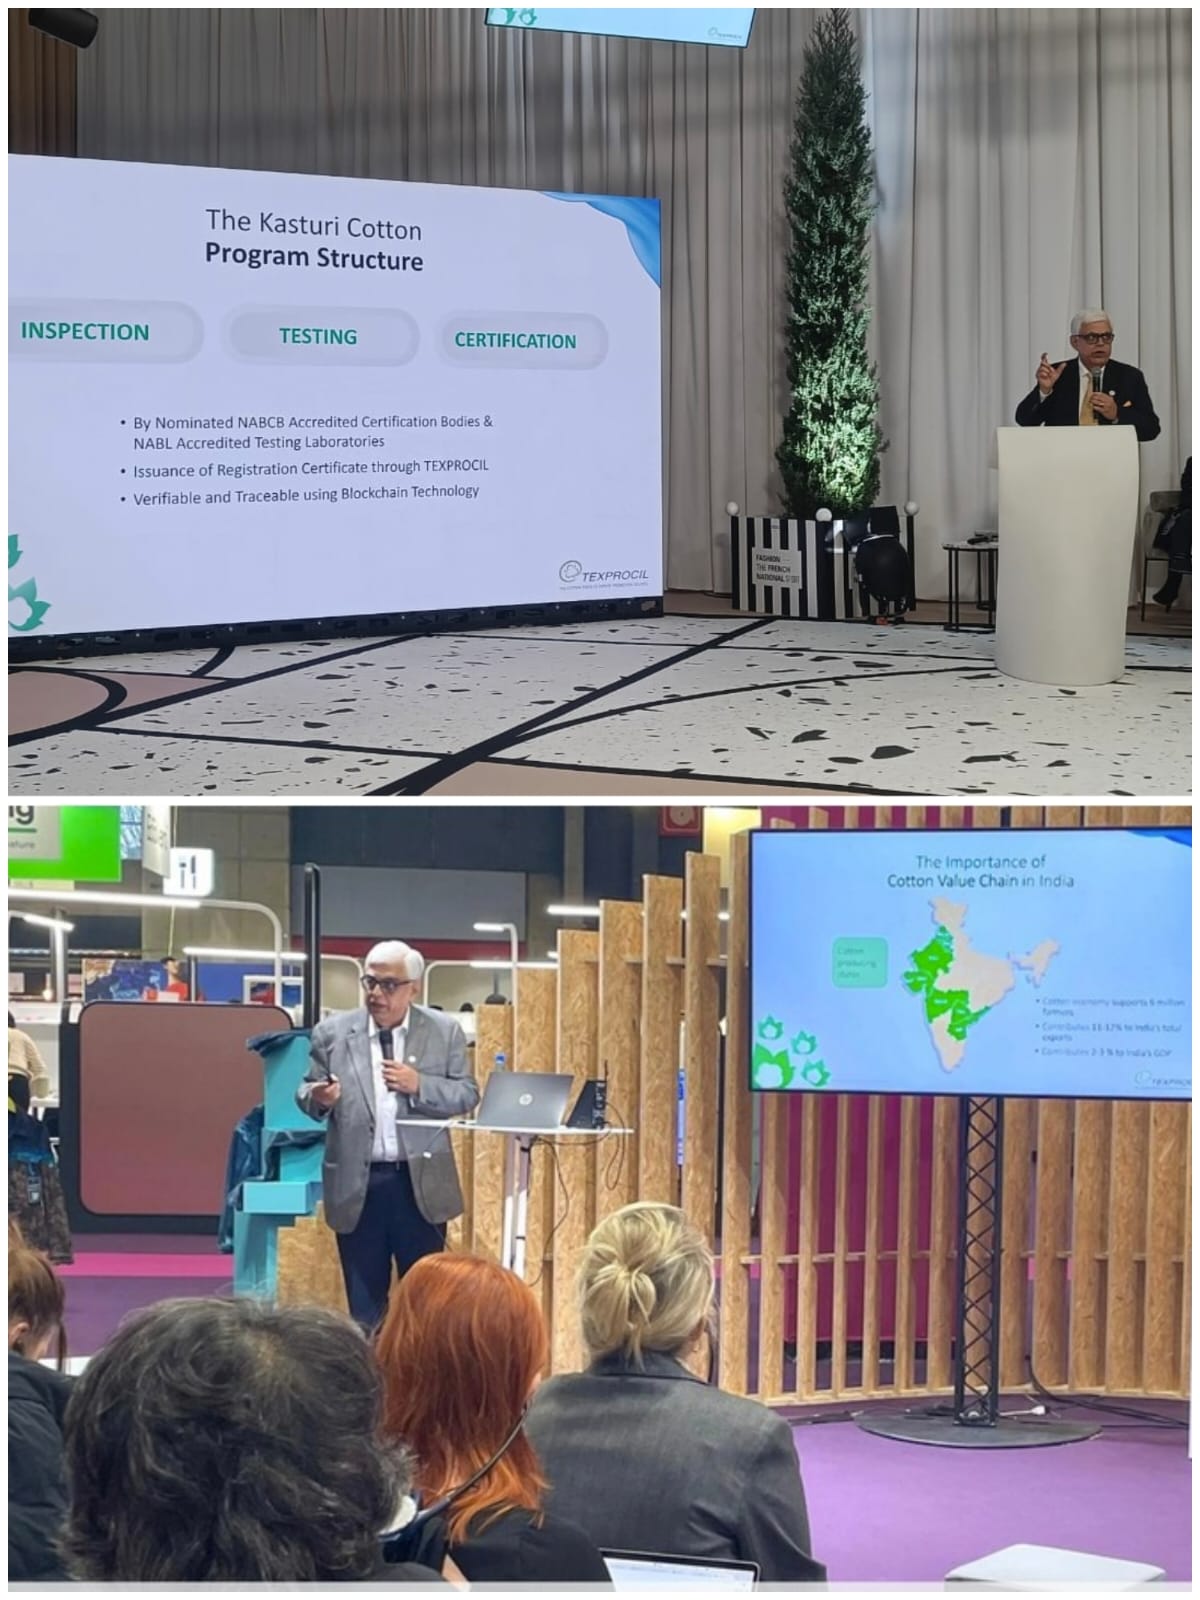 Dr Siddhartha Rajagopal, Eexecutive Director, Texprocil making a presentation on Kasturi Cotton Today (5th Feb 2024) at the Press Conference in the Texworld Evolution show